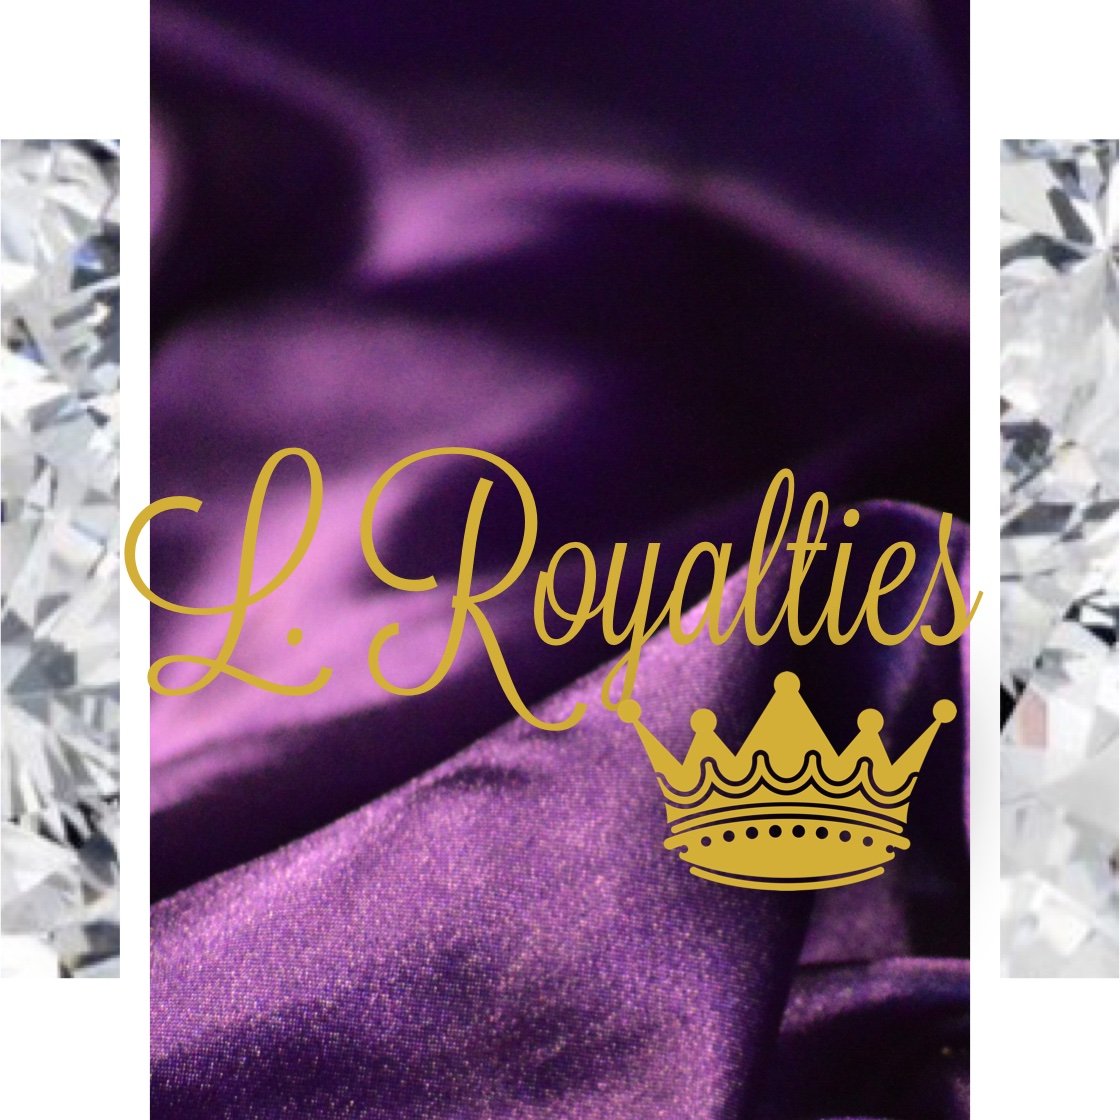 “Who says everyone can’t be royalty” 👑
Luxury Royalties, an online beauty shop! 
Hair, lashes, & much more soon! 
Email: LRoyaltiesbusiness@gmail.com